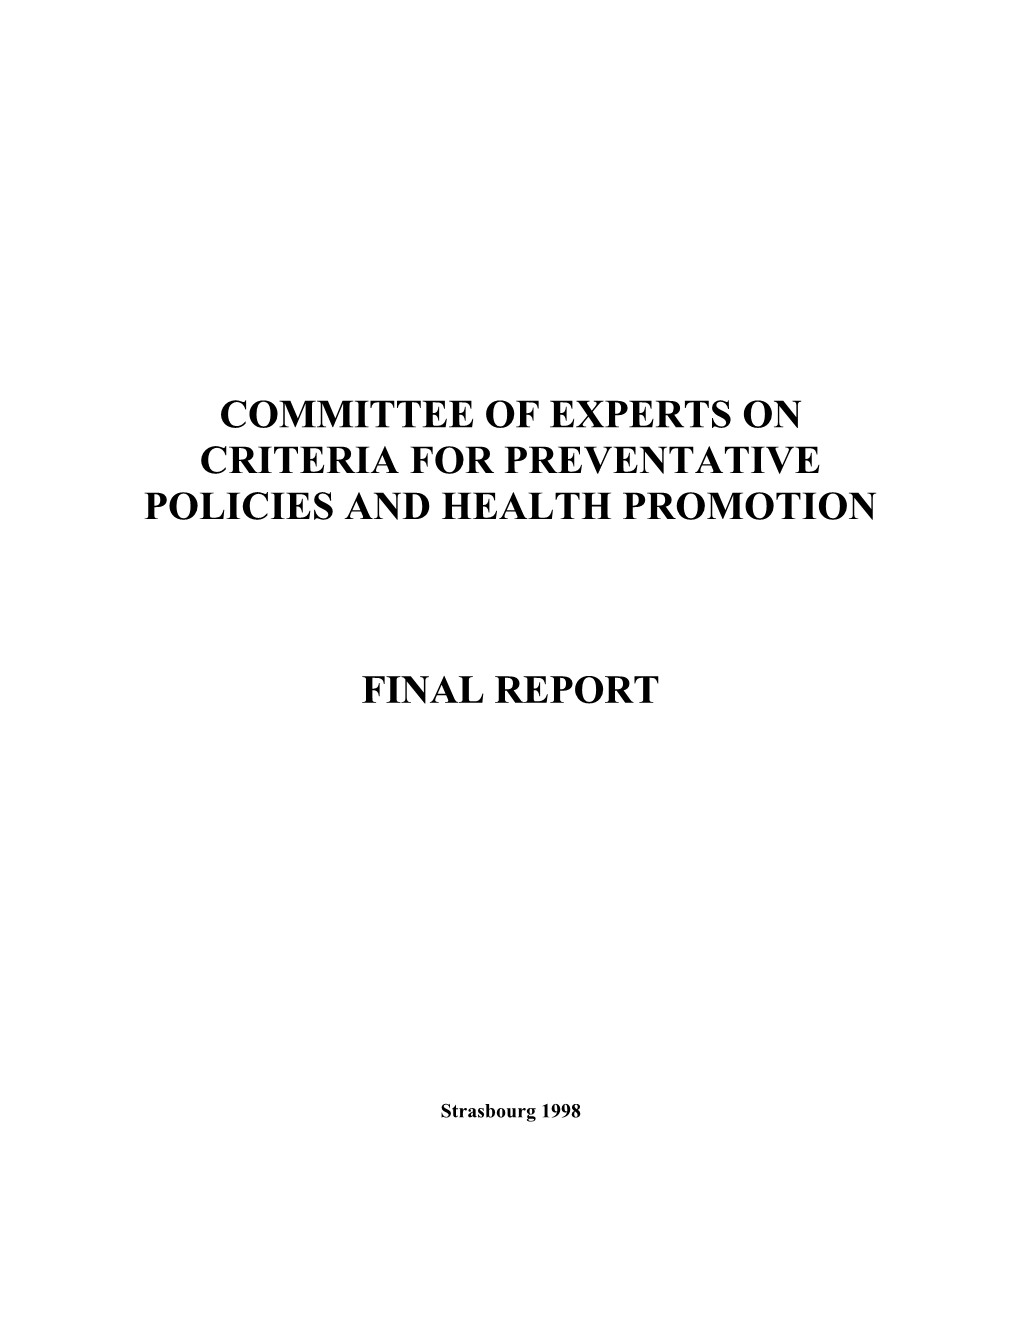 Committee of Experts on Criteria for Preventative Policies and Health Promotion